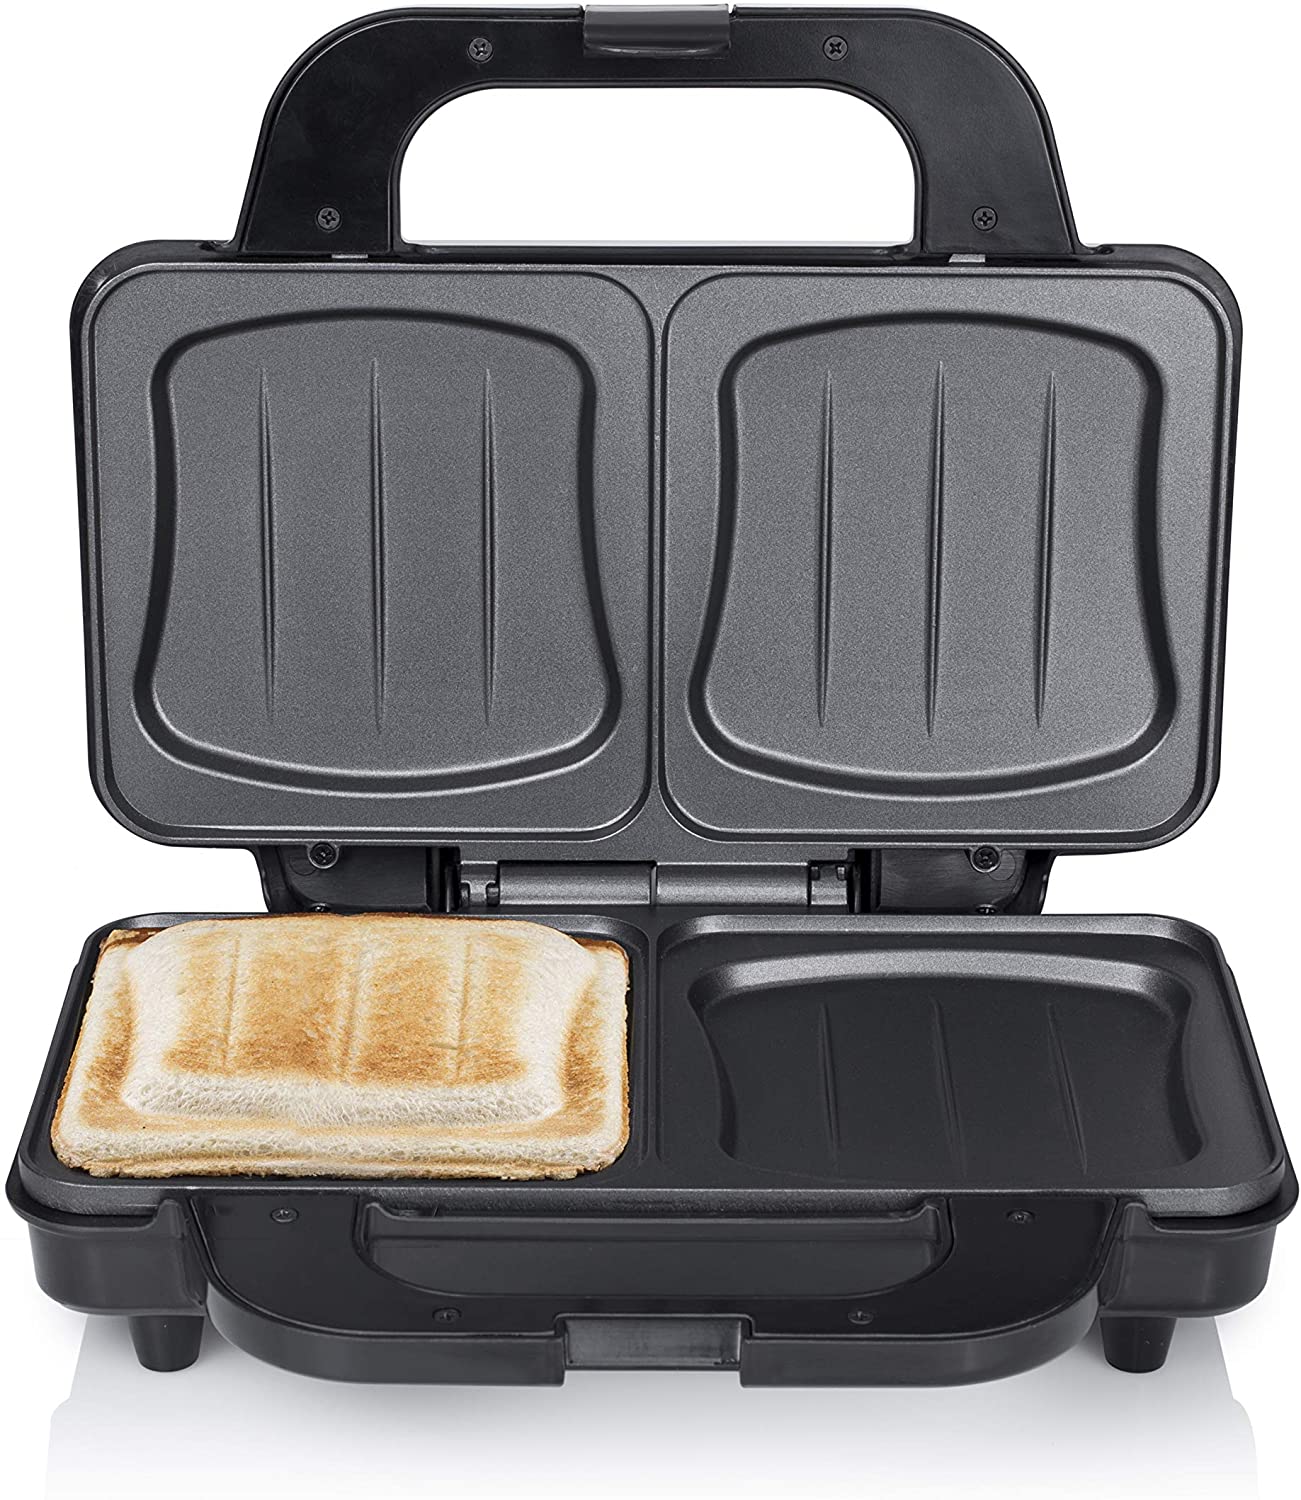 Tristar SA-3060 Sandwich Maker - Extra Deep Grill Plates - Two Servings at the same time